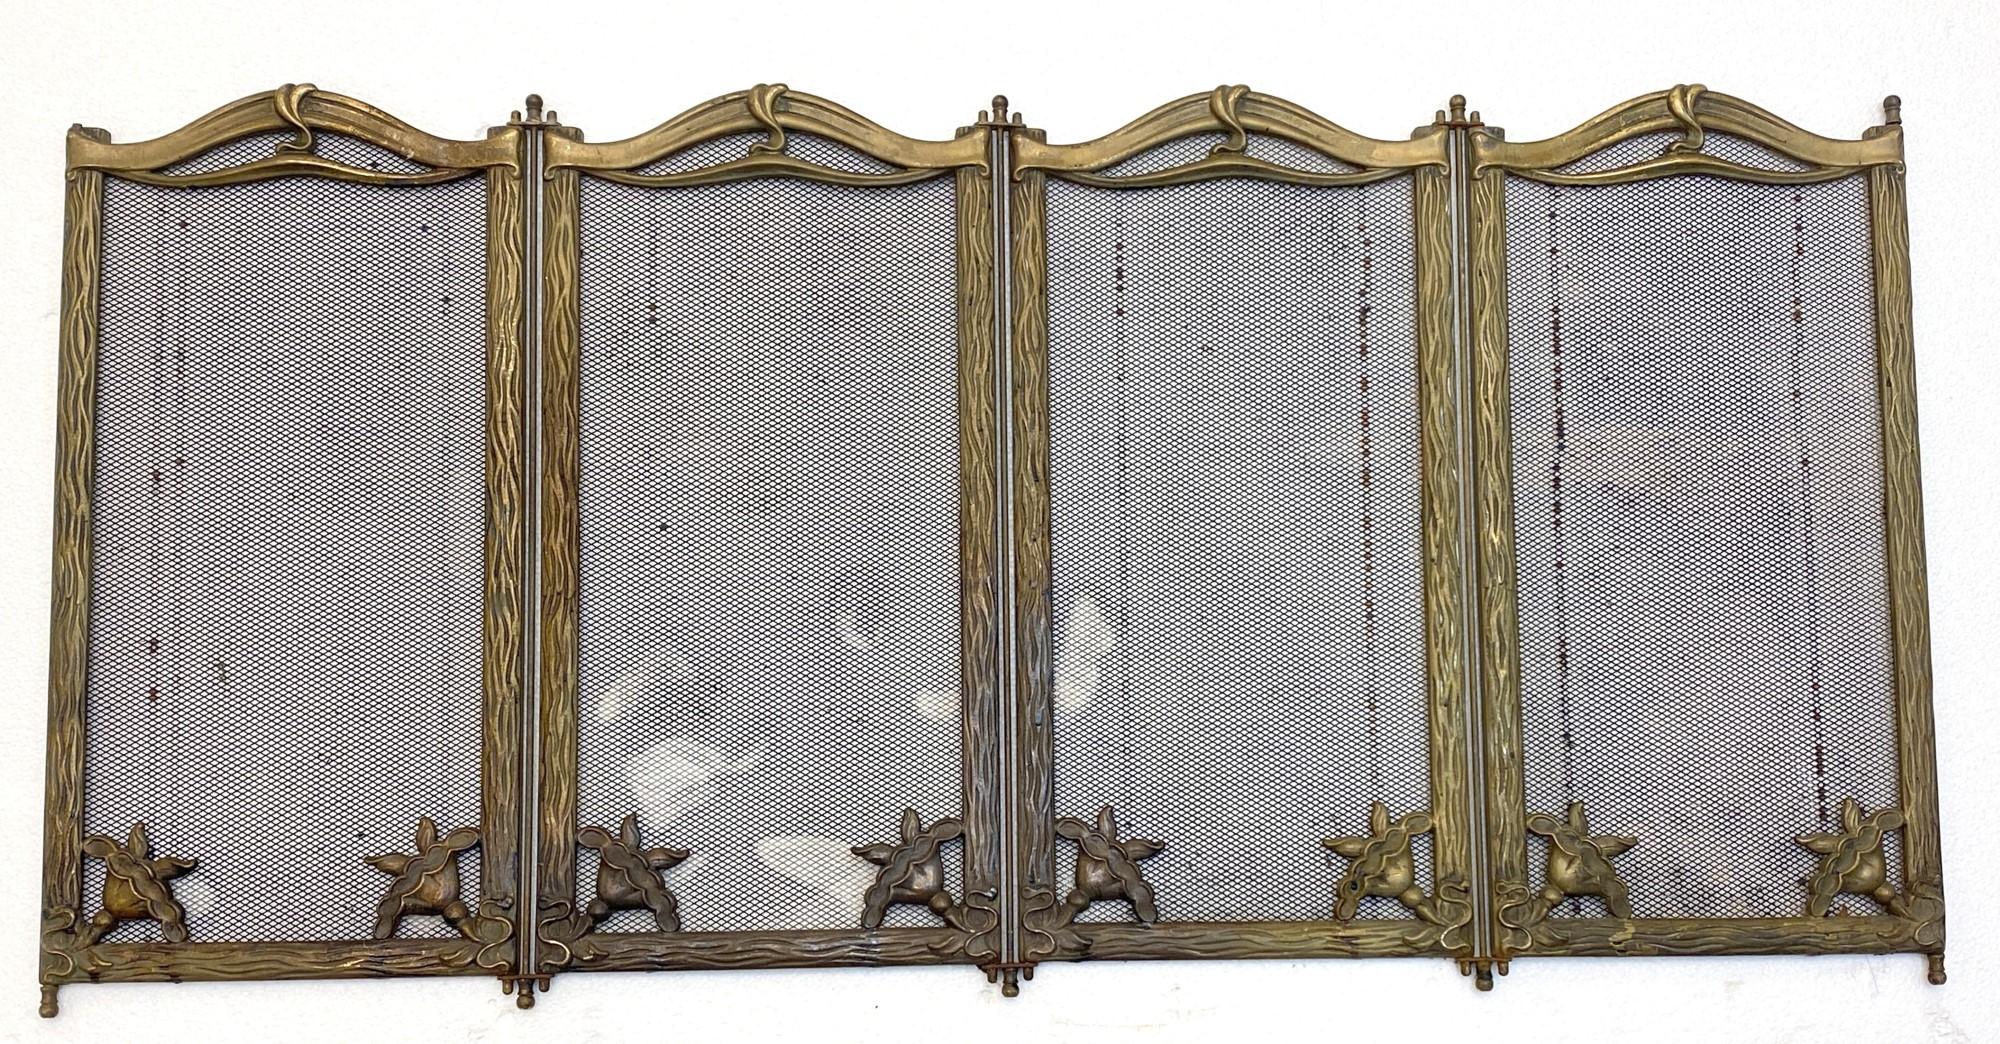 European 1920s French Art Nouveau 4 Section Steel & Brass Floral Detail Fireplace Screen